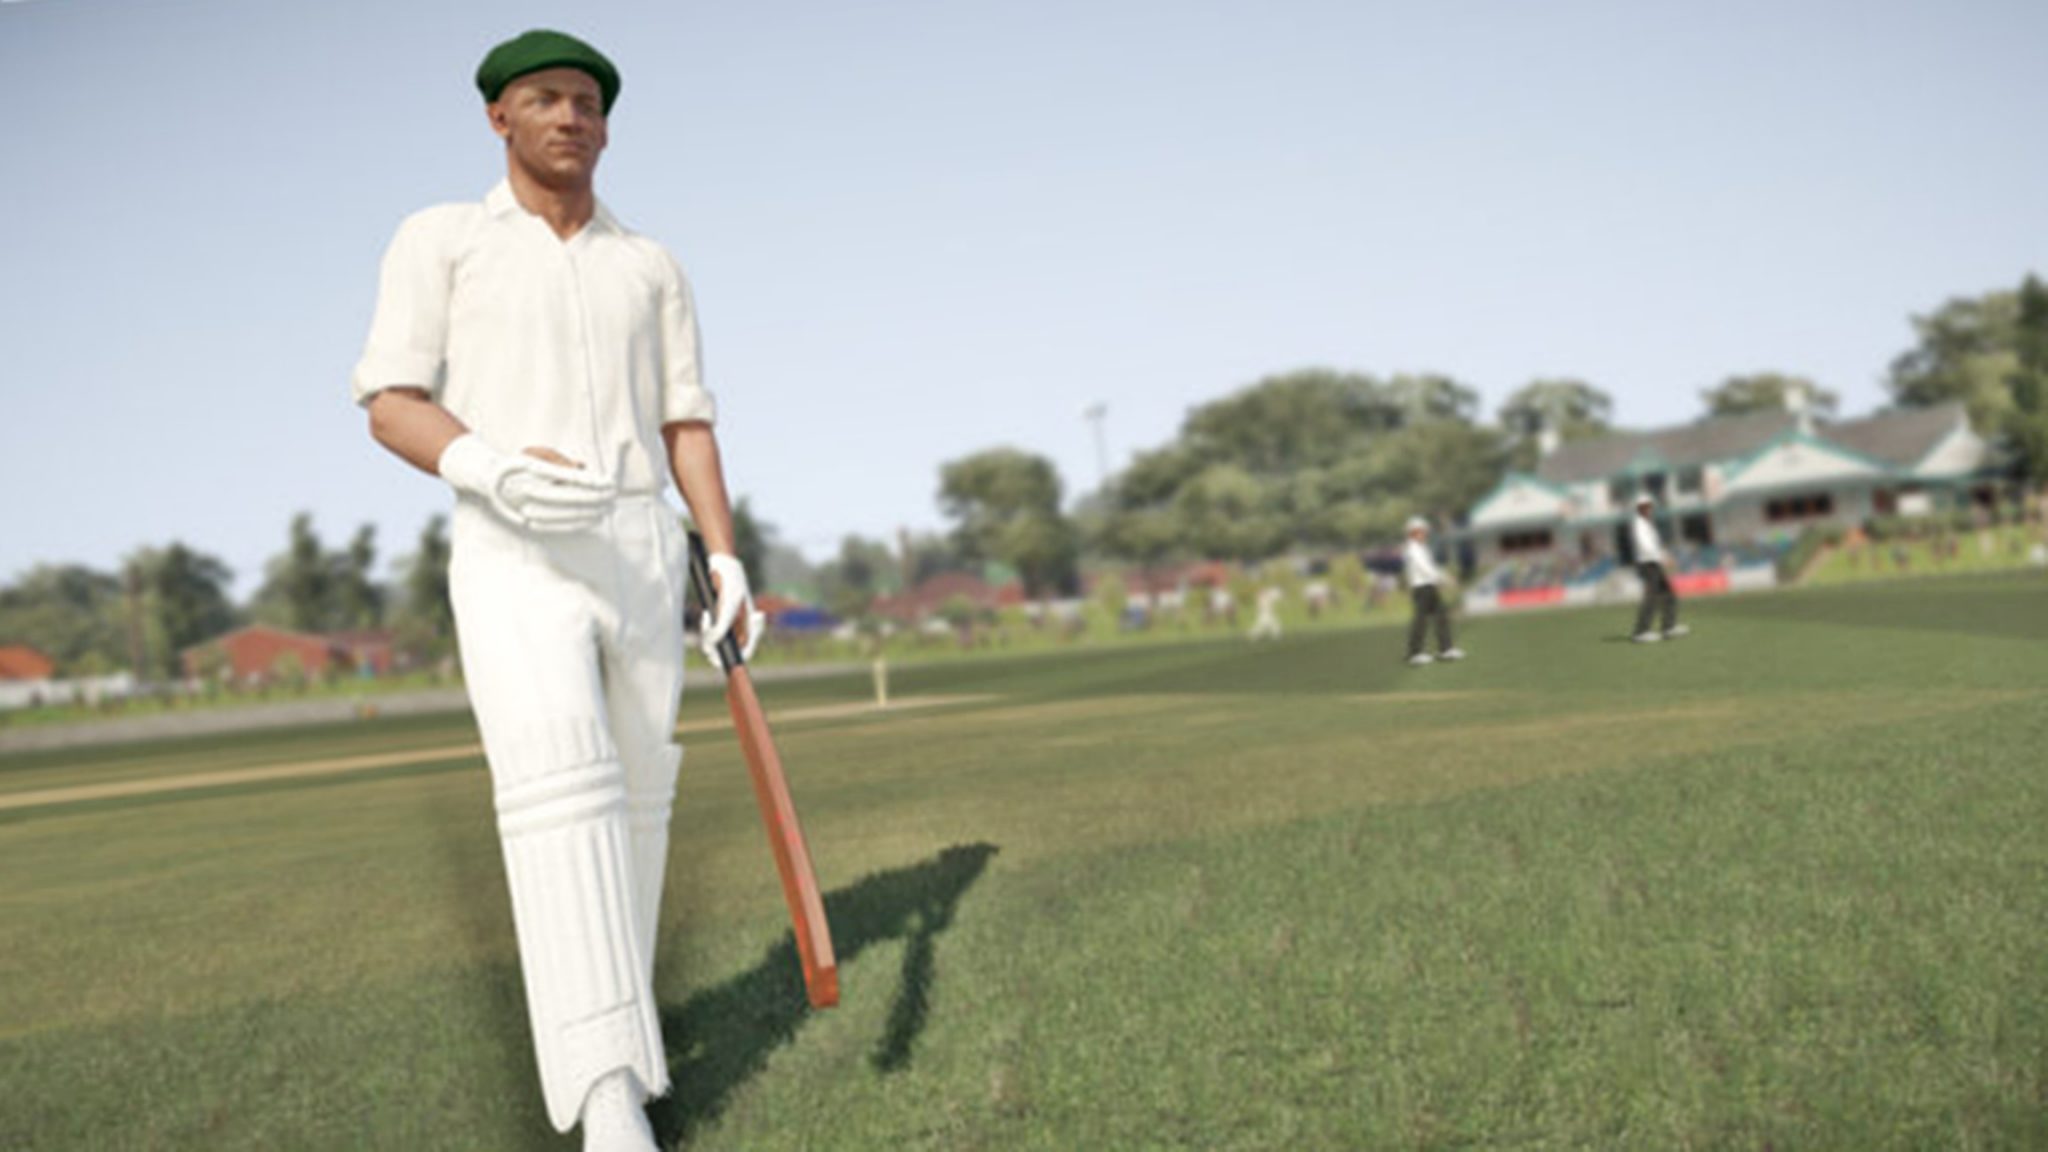 don bradman cricket 17 free download highly compressed